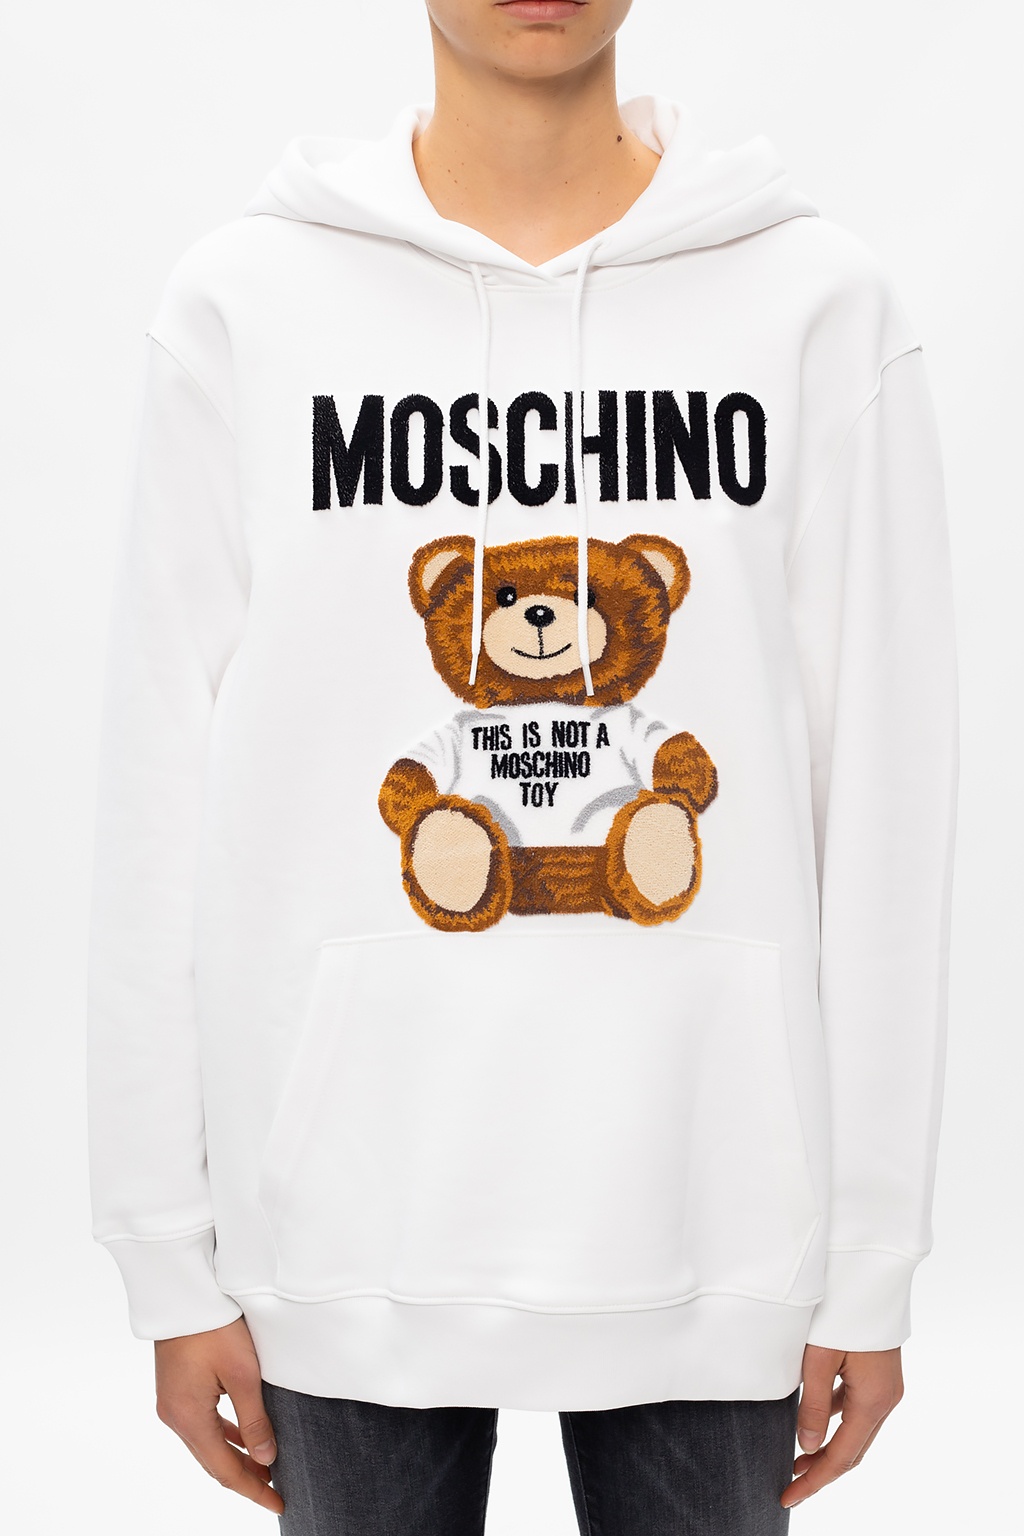 this is not a moschino toy hoodie